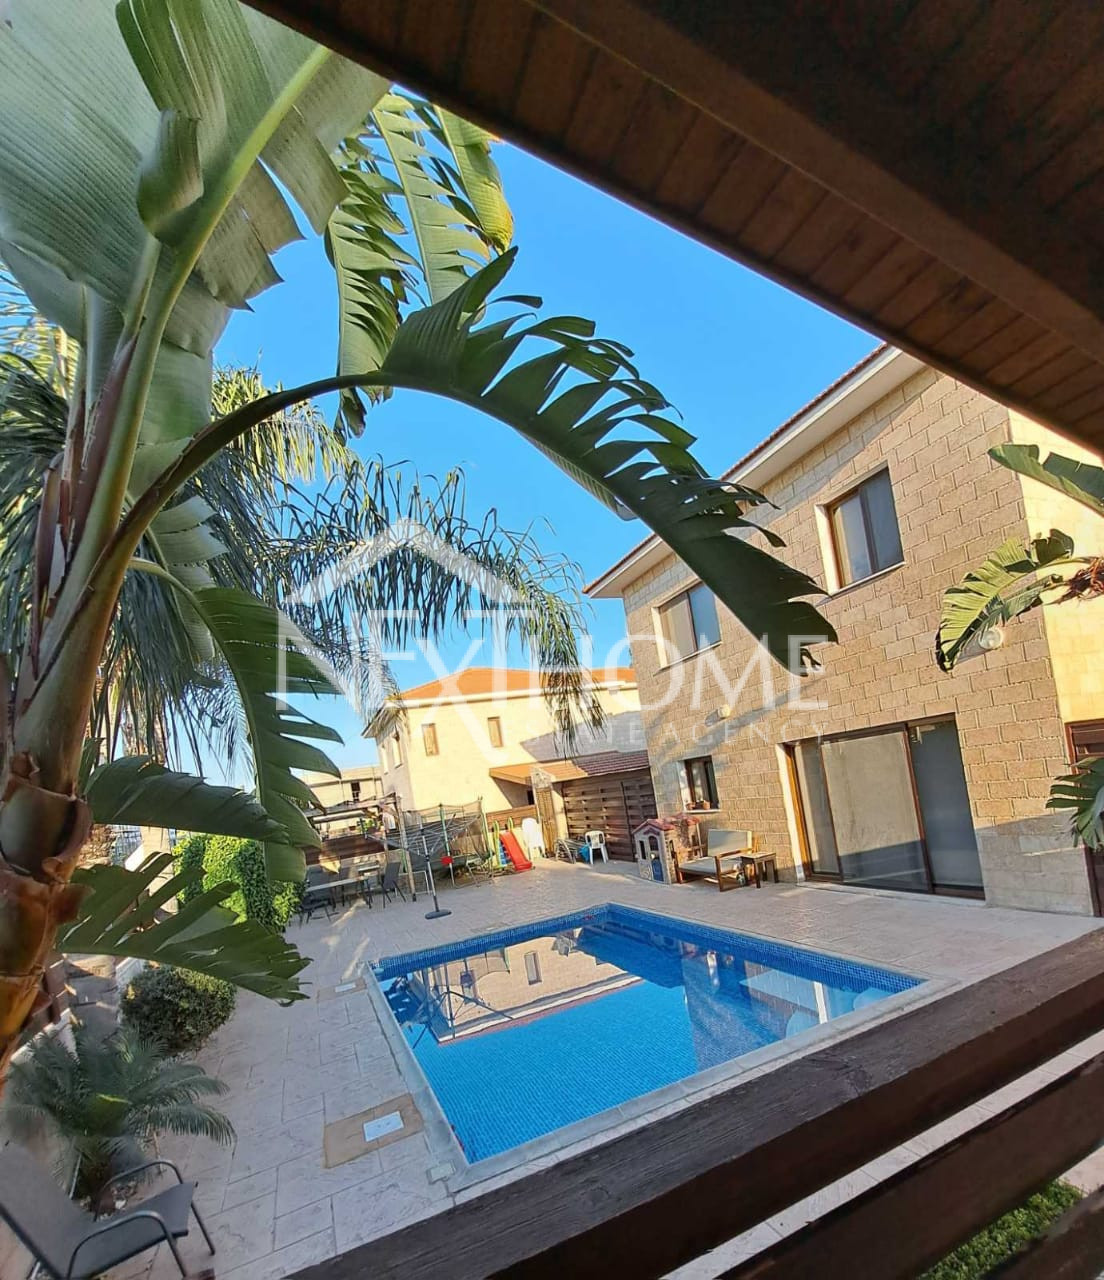 3 Bedroom House for Rent in Pyla, Larnaca District